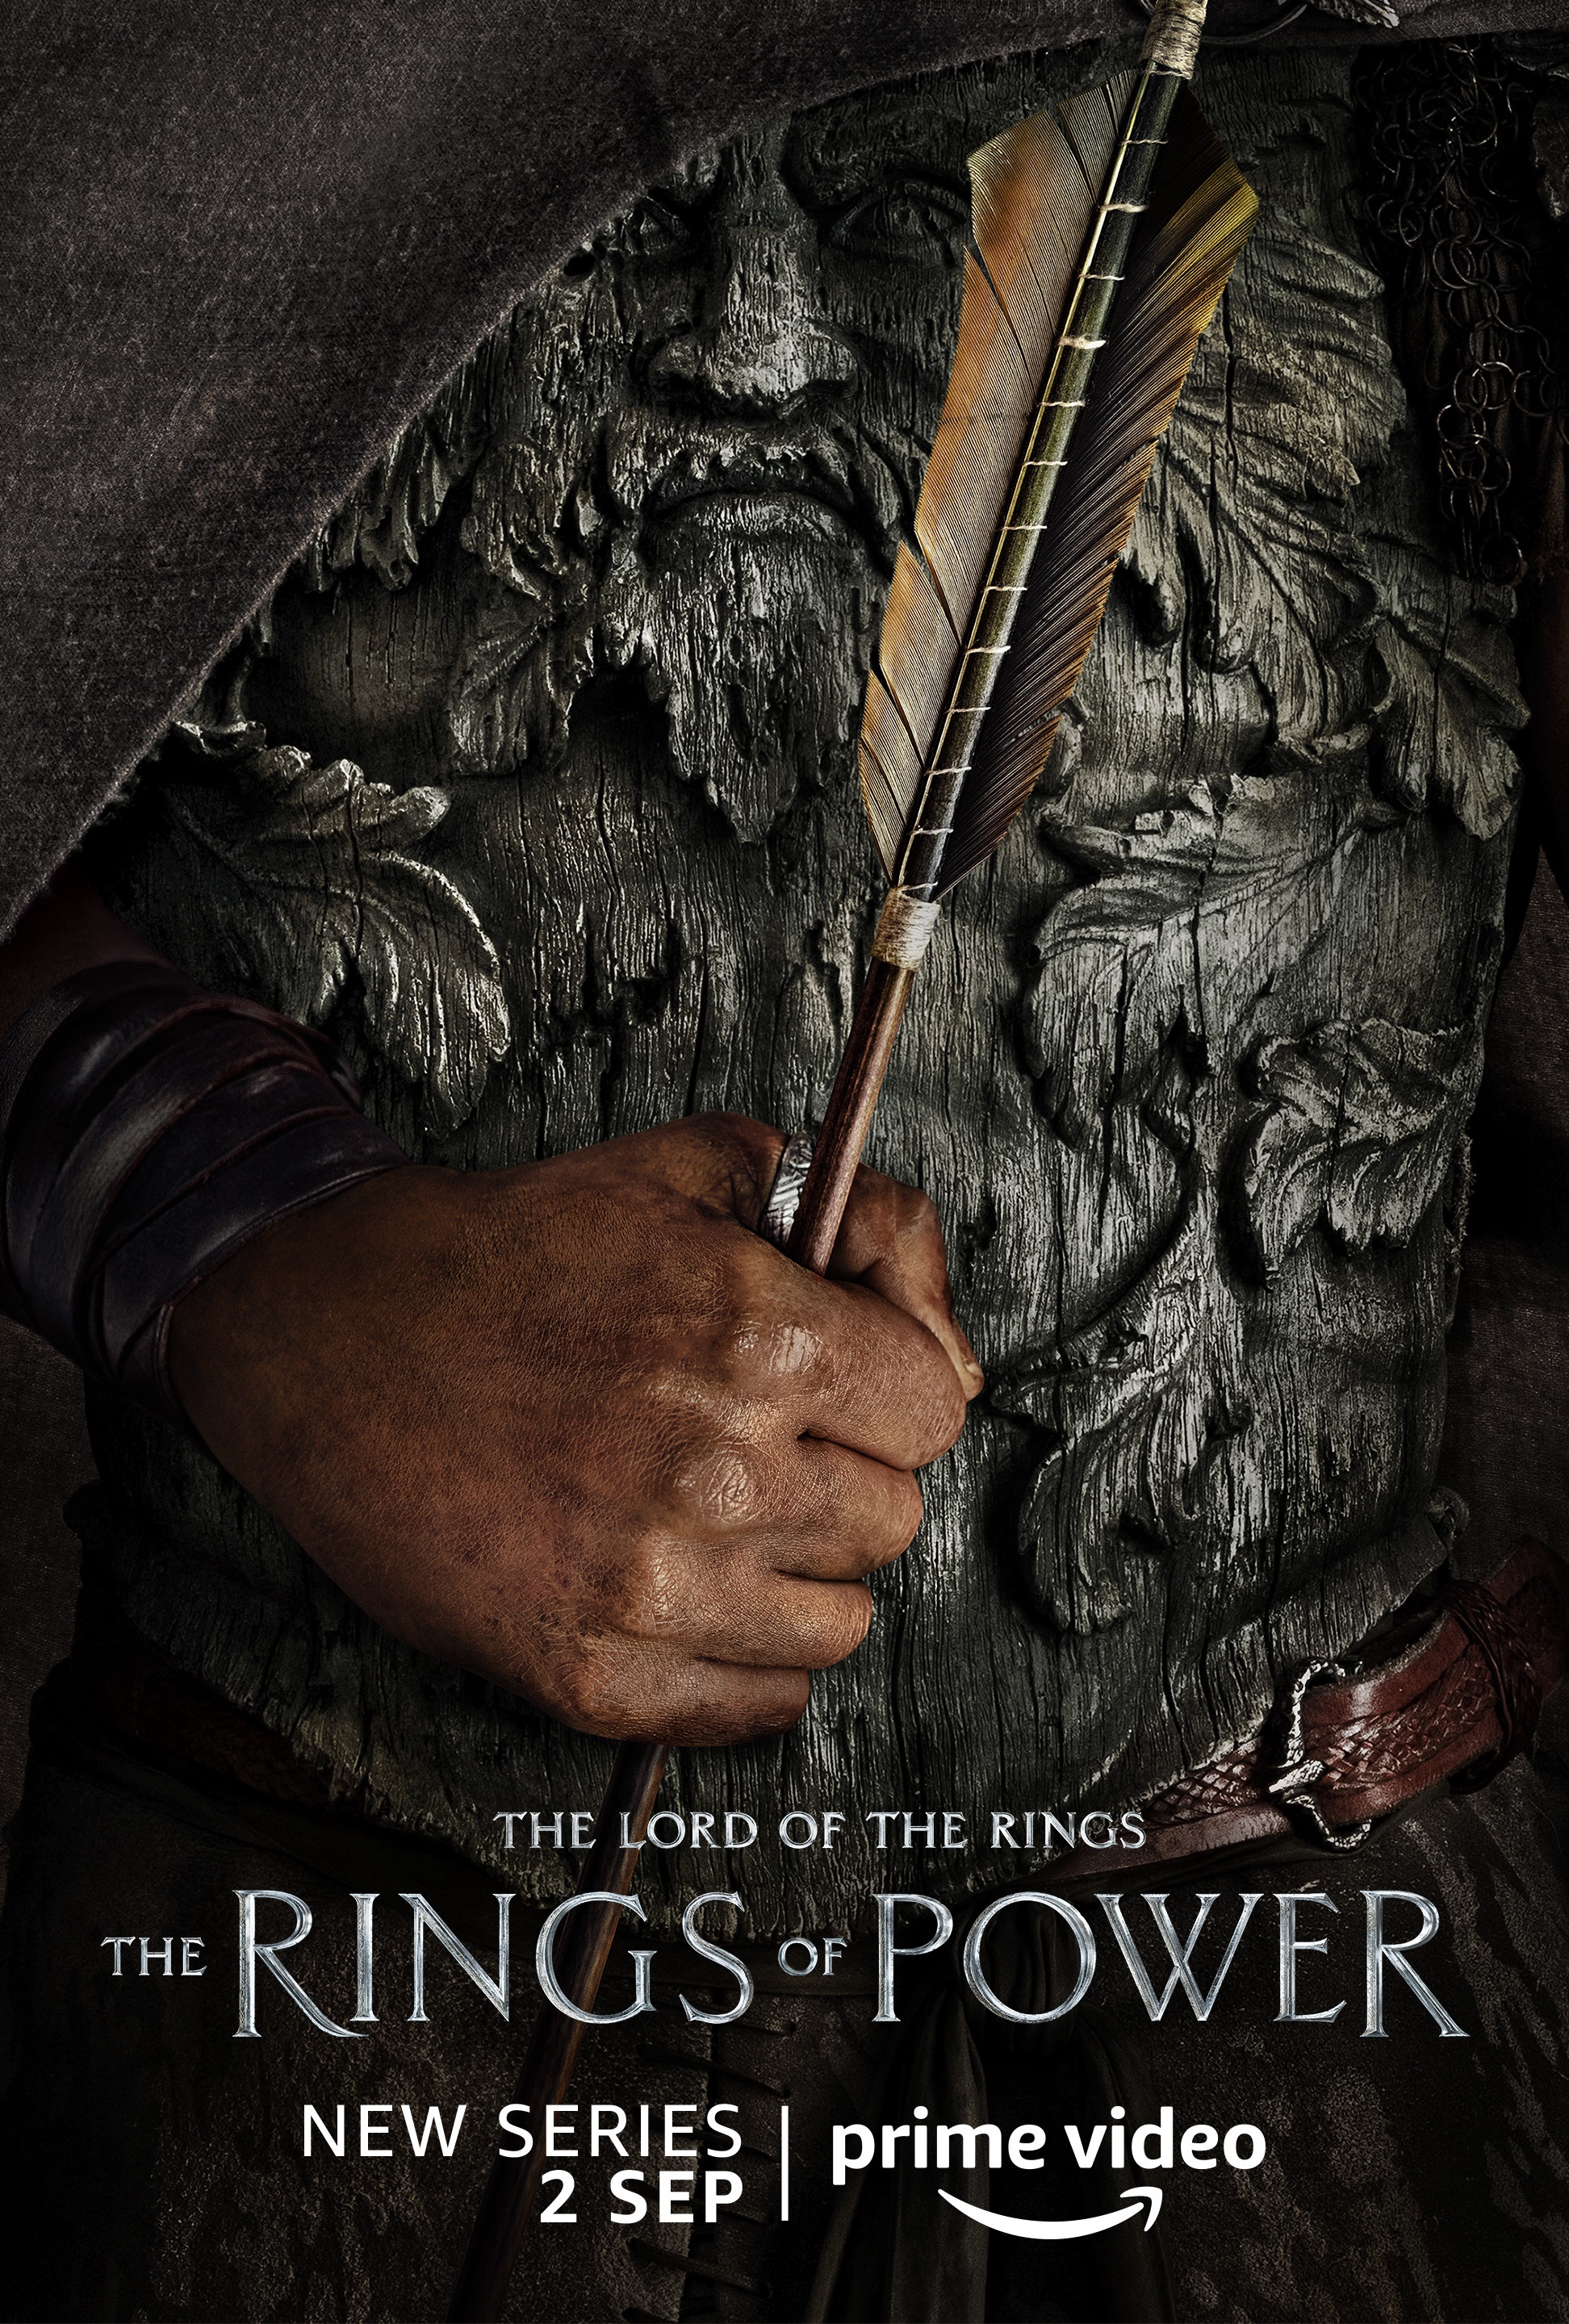 An archer character poster for Lord of the Rings: The Rings of Power